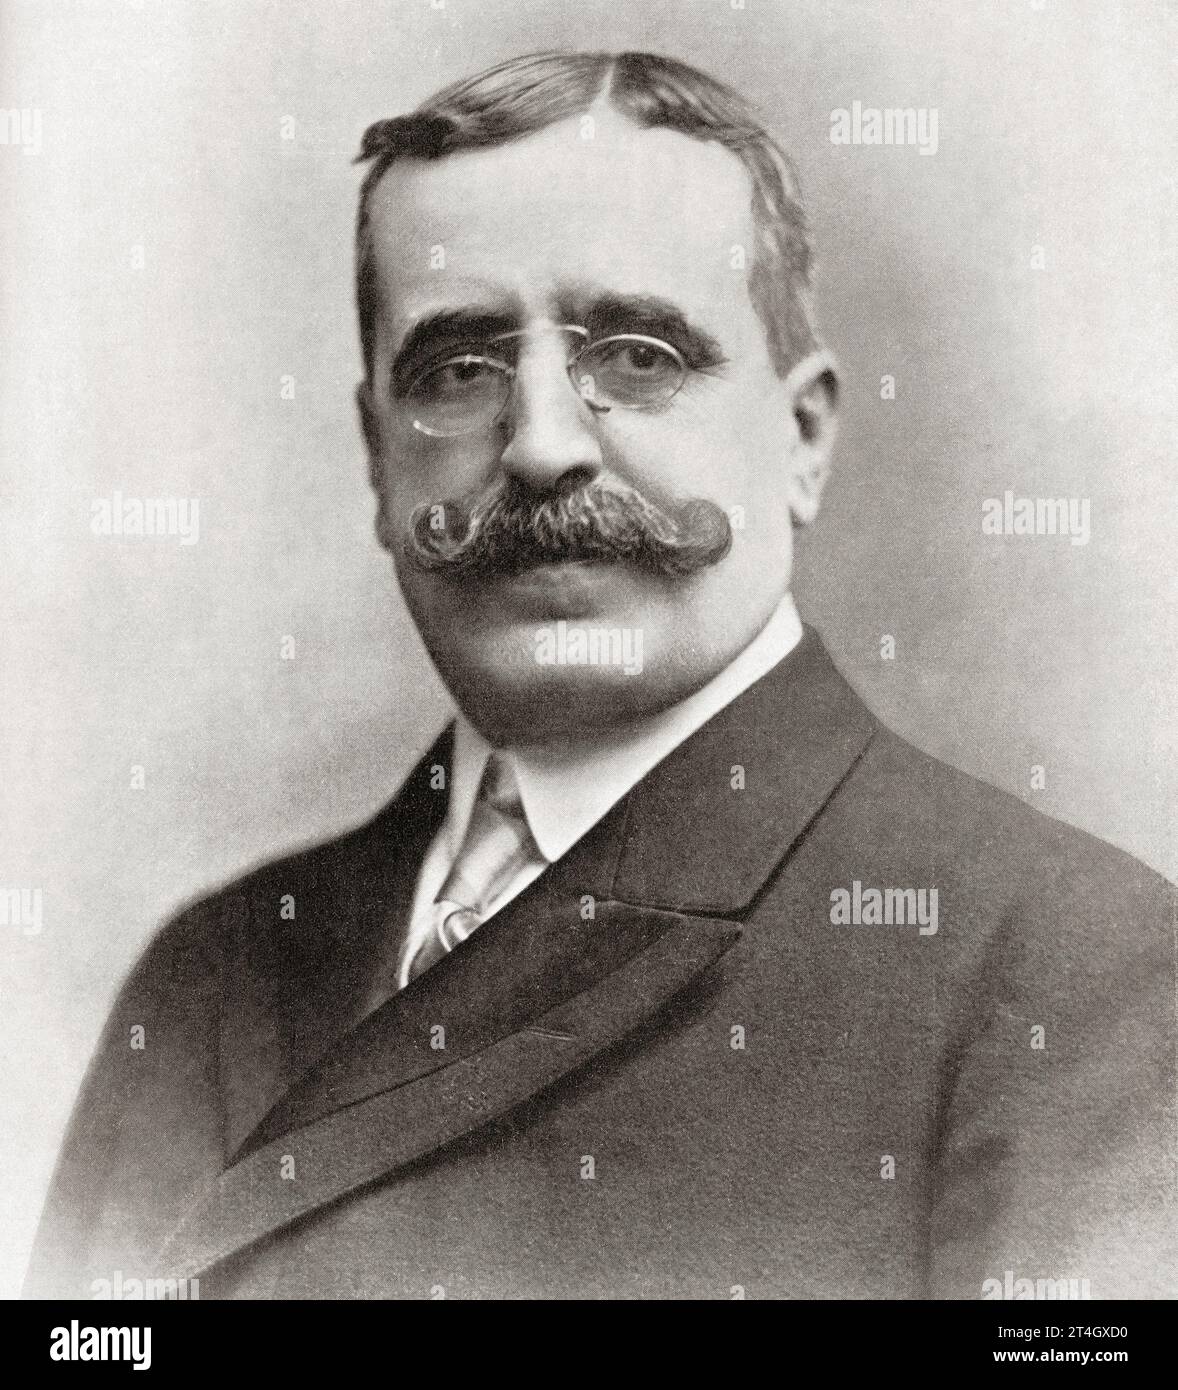 José Canalejas y Méndez, 1854 –  1912.  Spanish politician, Prime Minister of Spain.  From Mundo Grafico, published 1912. Stock Photo